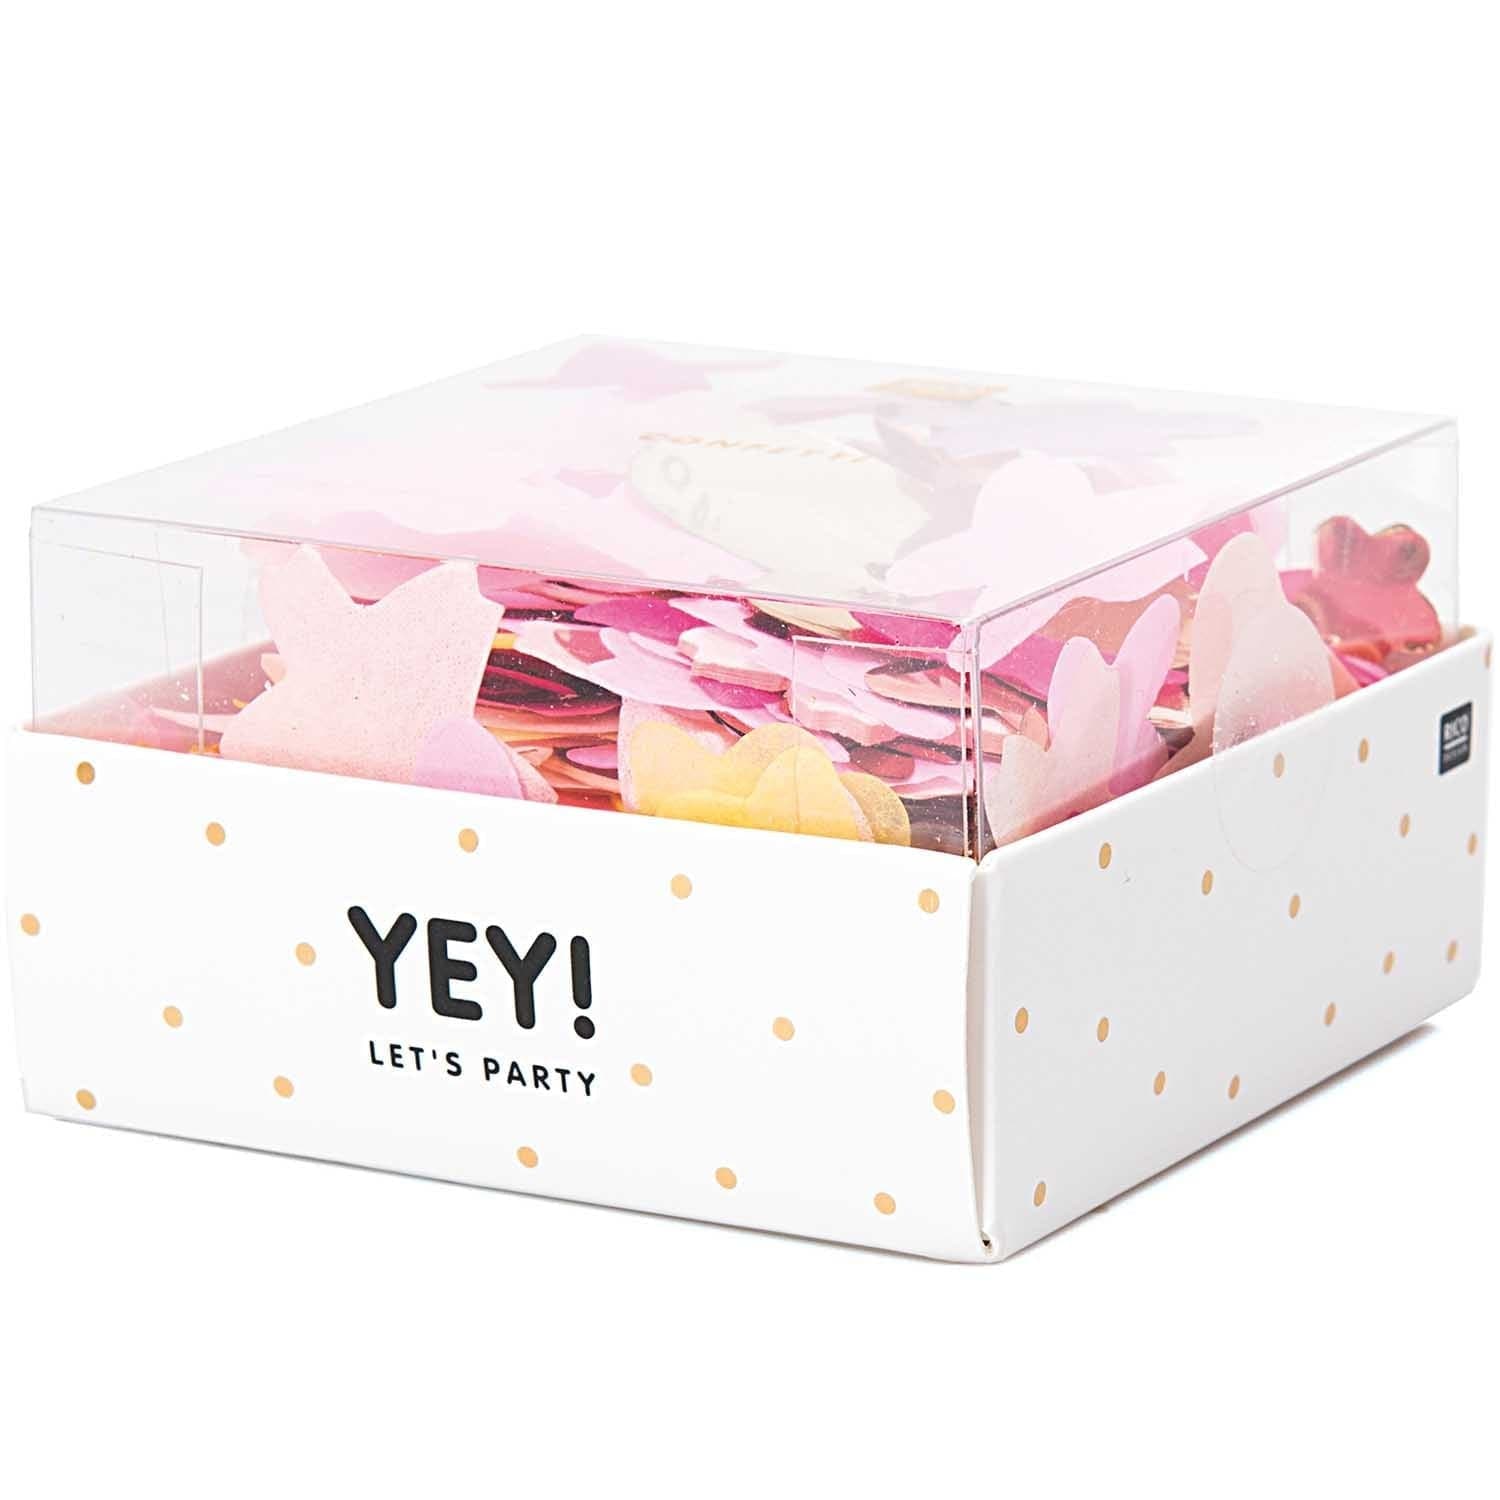 Flower shaped Confetti | Pink Party Confetti  | Pretty Little Party YEY! Lets Party